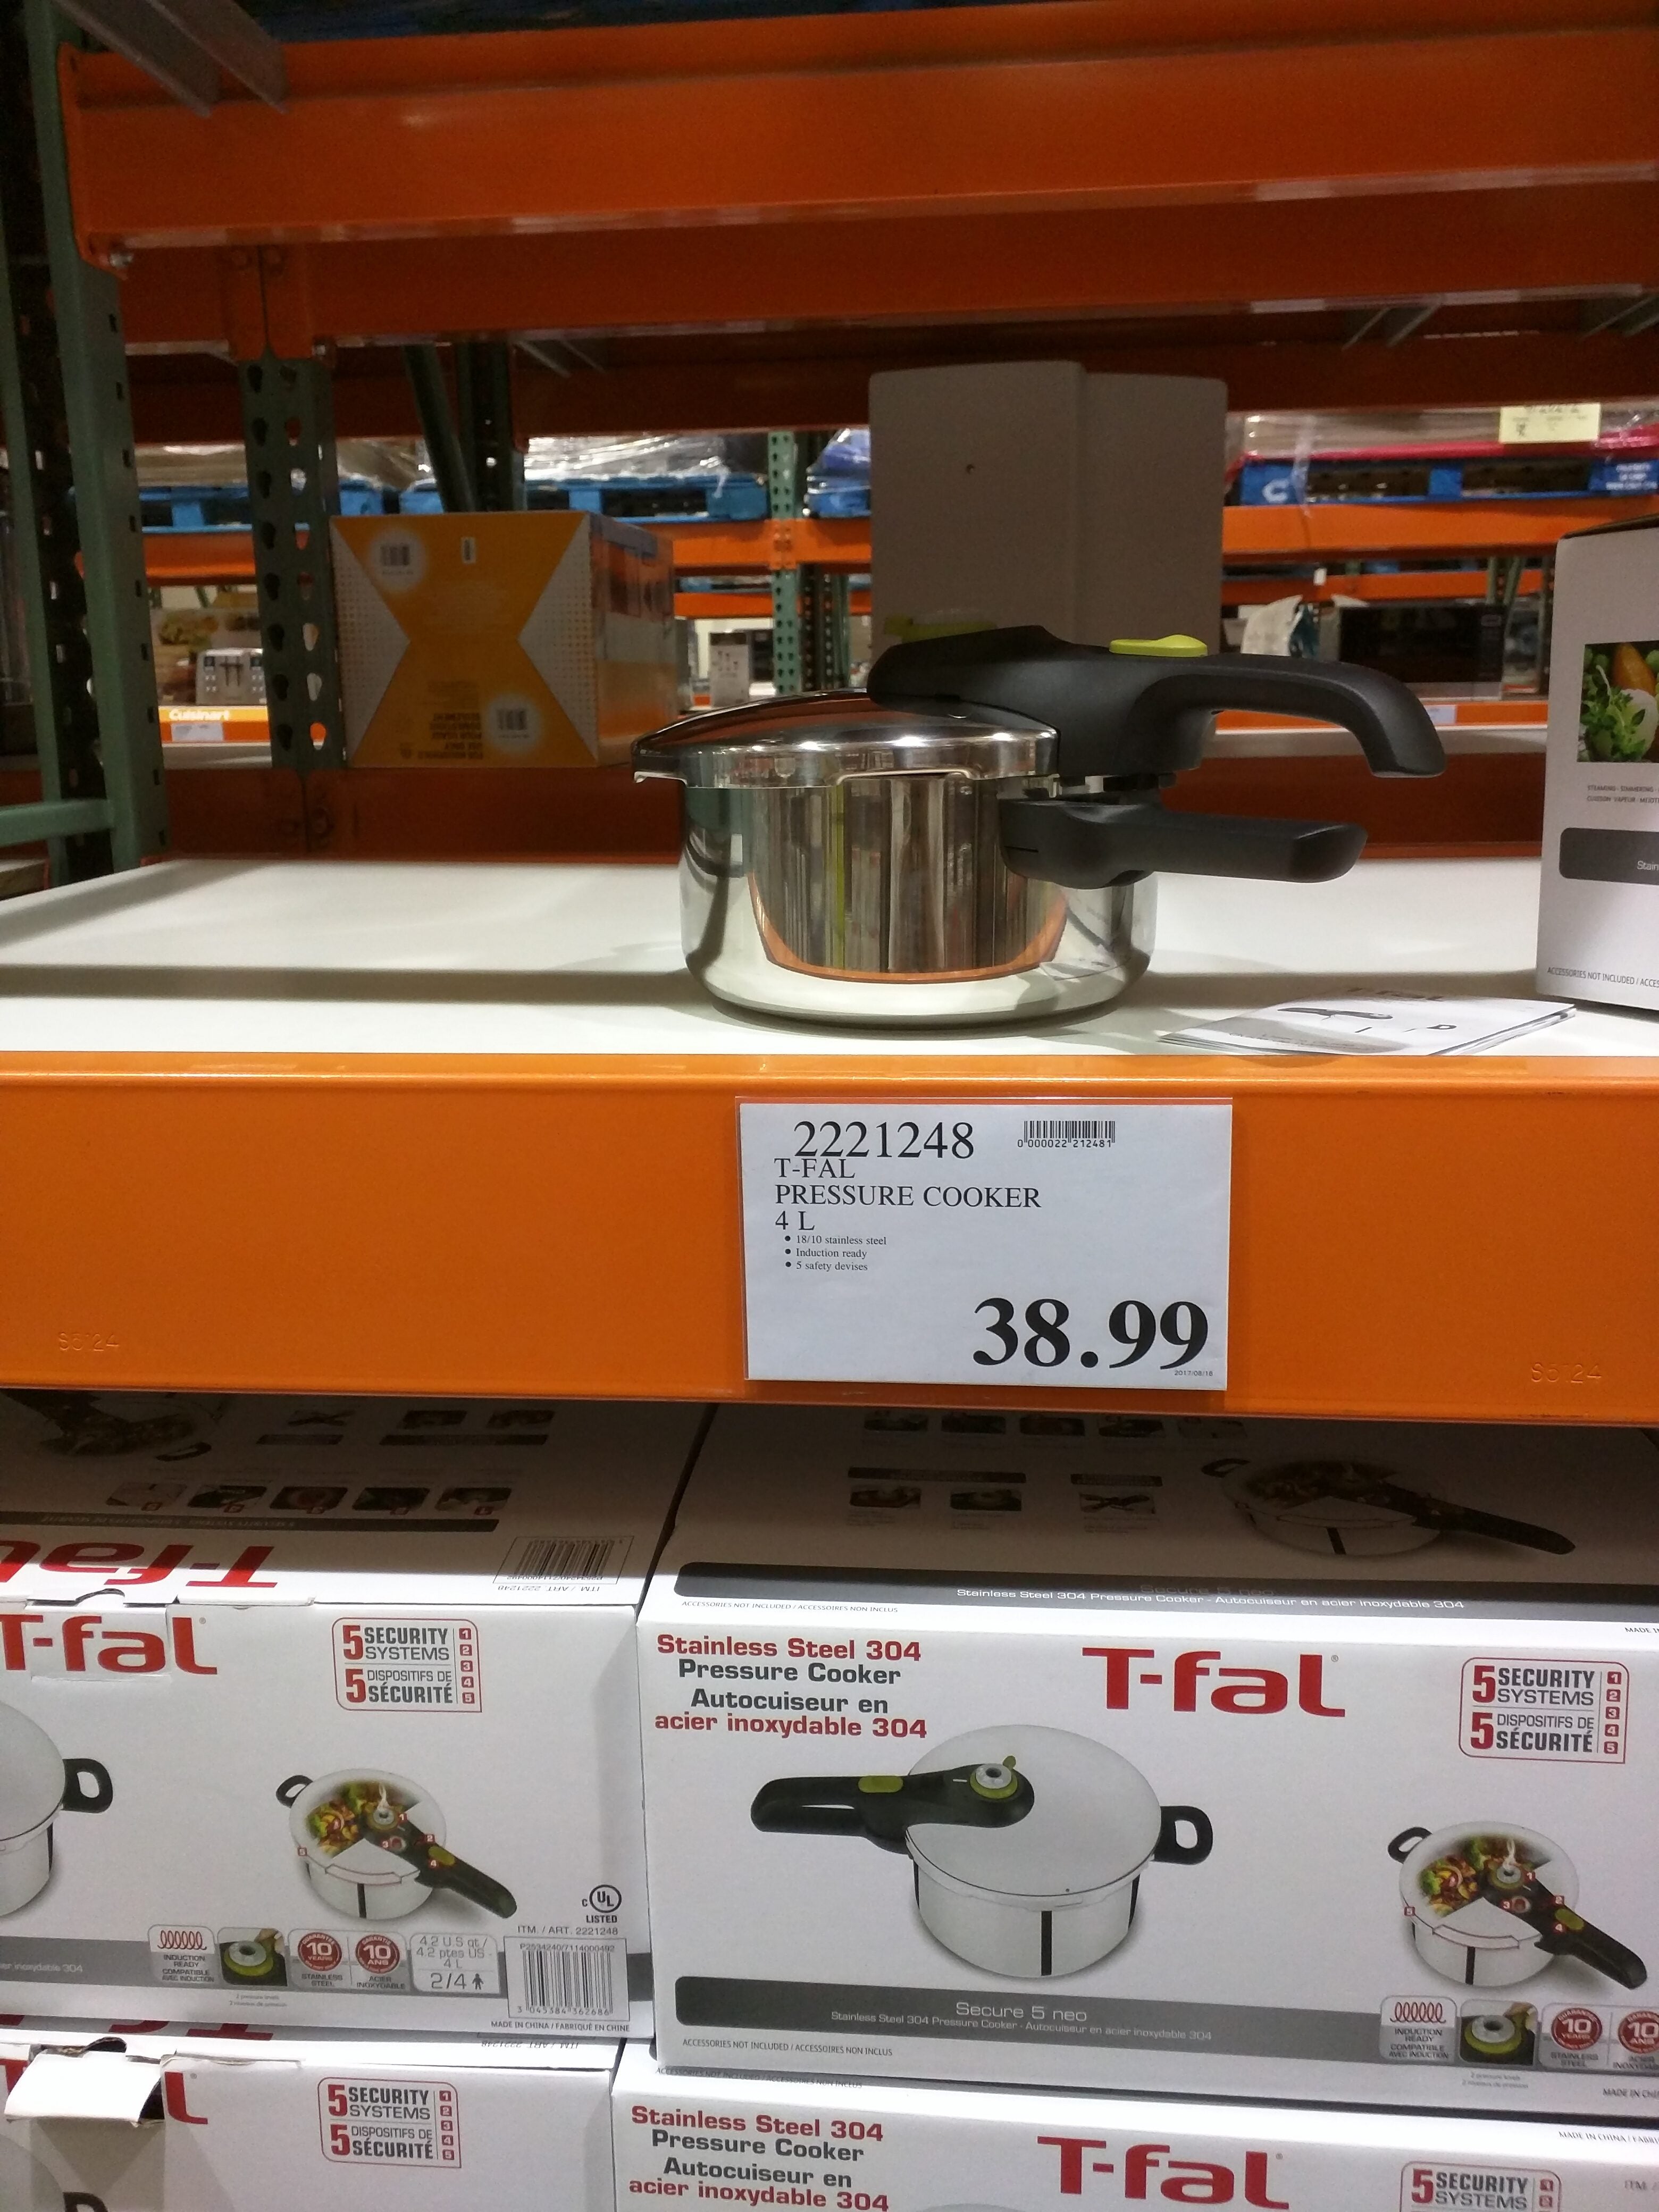 Costco] *Hot* T-Fal 5 security SS Pressure Cooker $36.99 V/S at CT for  $169.99 - RedFlagDeals.com Forums